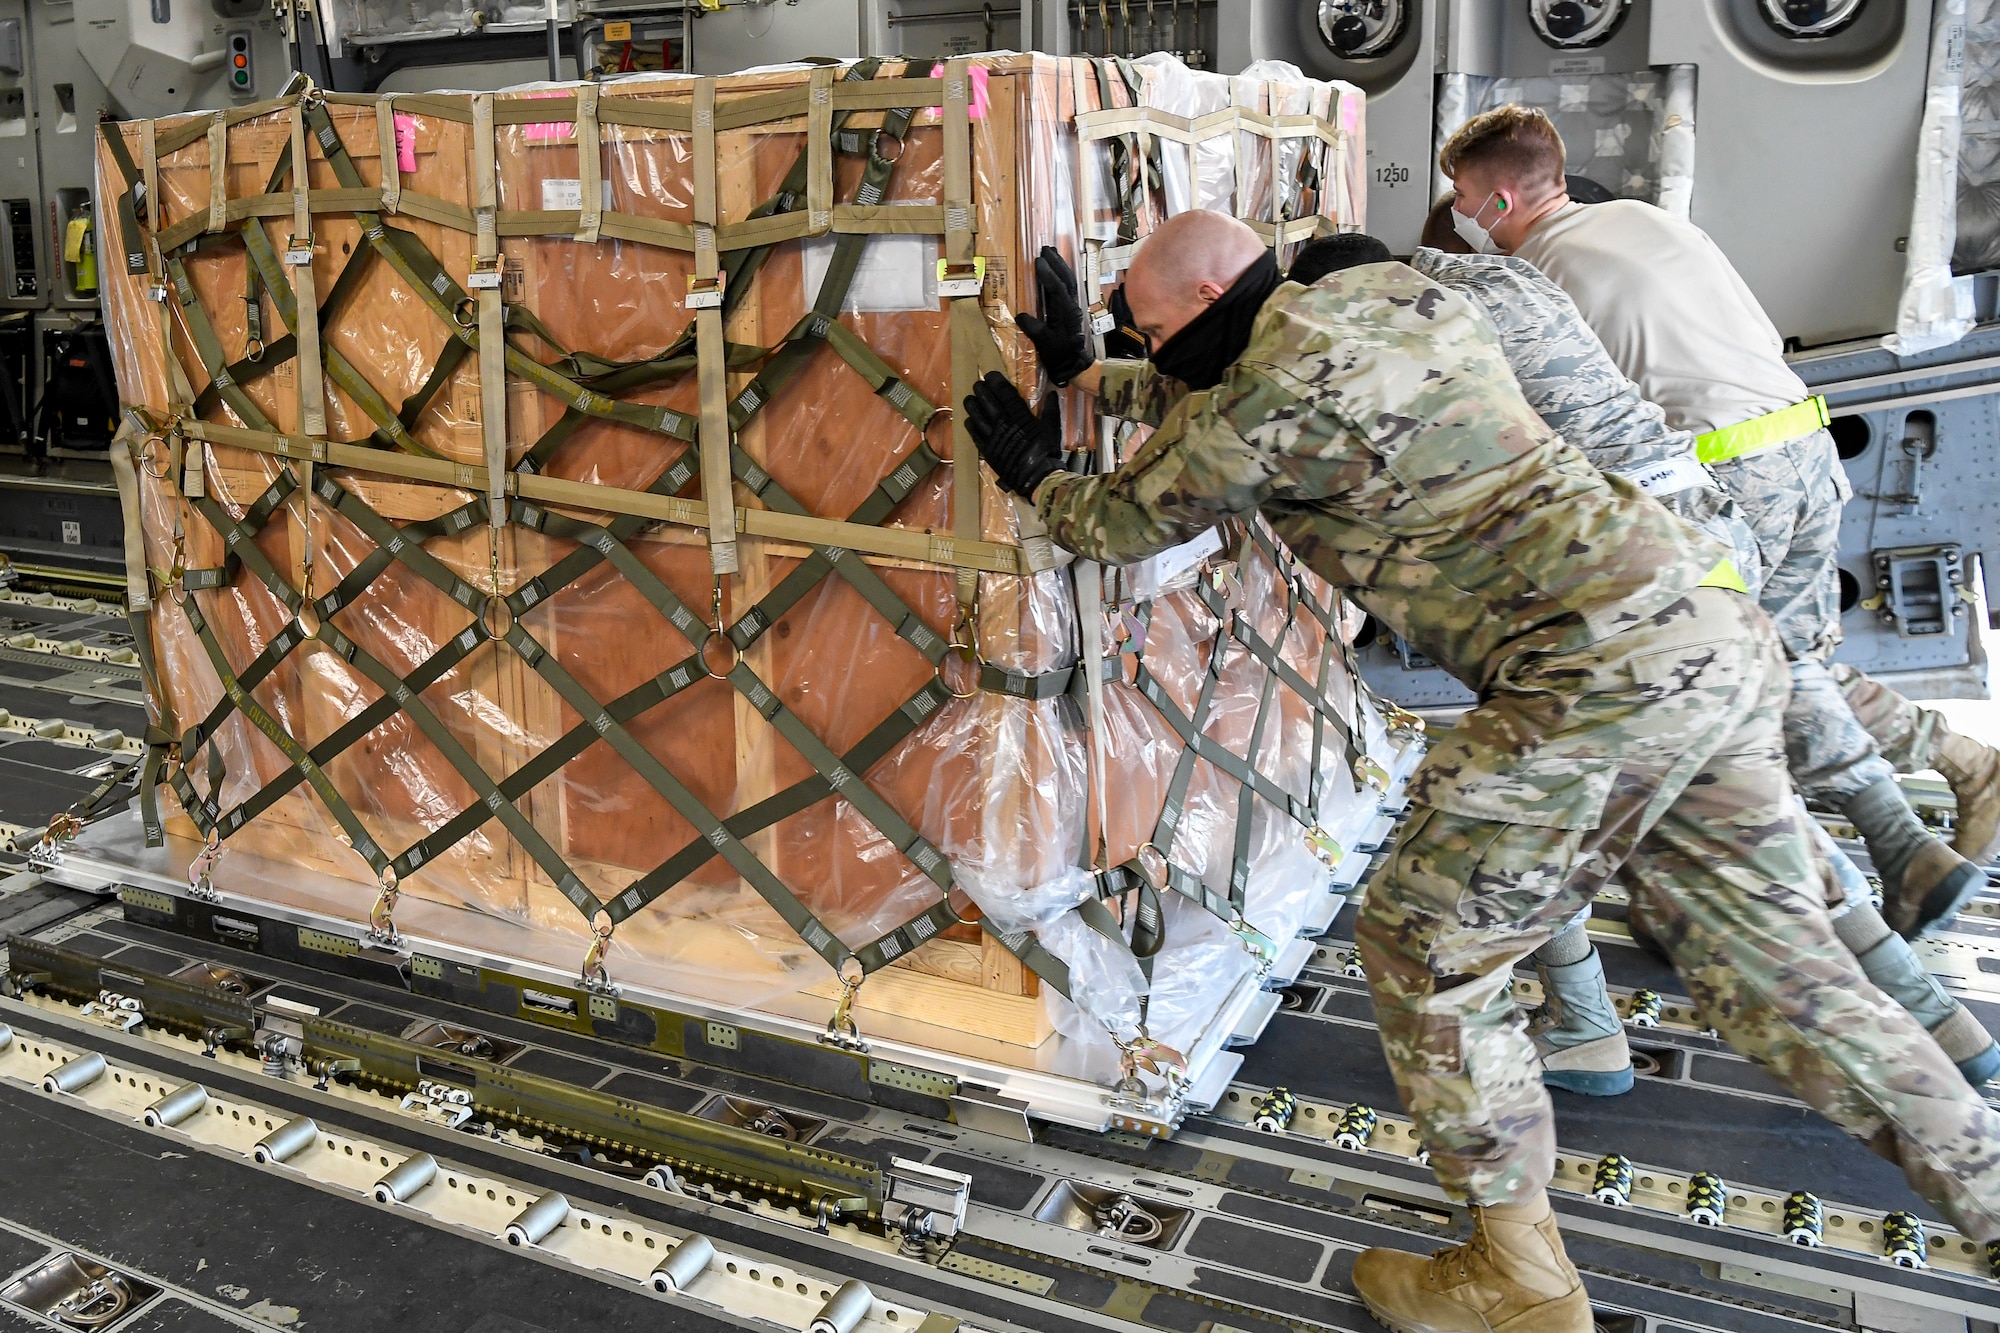 Airmen from the 436th Aerial Port Squadron load cargo onto an Indian air force C-17 Globemaster III at Dover Air Force Base, Delaware, Nov. 20, 2020. The U.S. strengthens its international partnerships through foreign military sales. Dover AFB actively supports $3.5 billion worth of FMS due to its strategic location and 436th Aerial Port Squadron, the largest aerial port in the Department of Defense. As the world’s oldest and largest democracies, the United States and India share a commitment to freedom, human rights and rule of law. (U.S. Air Force photo by Senior Airman Christopher Quail)